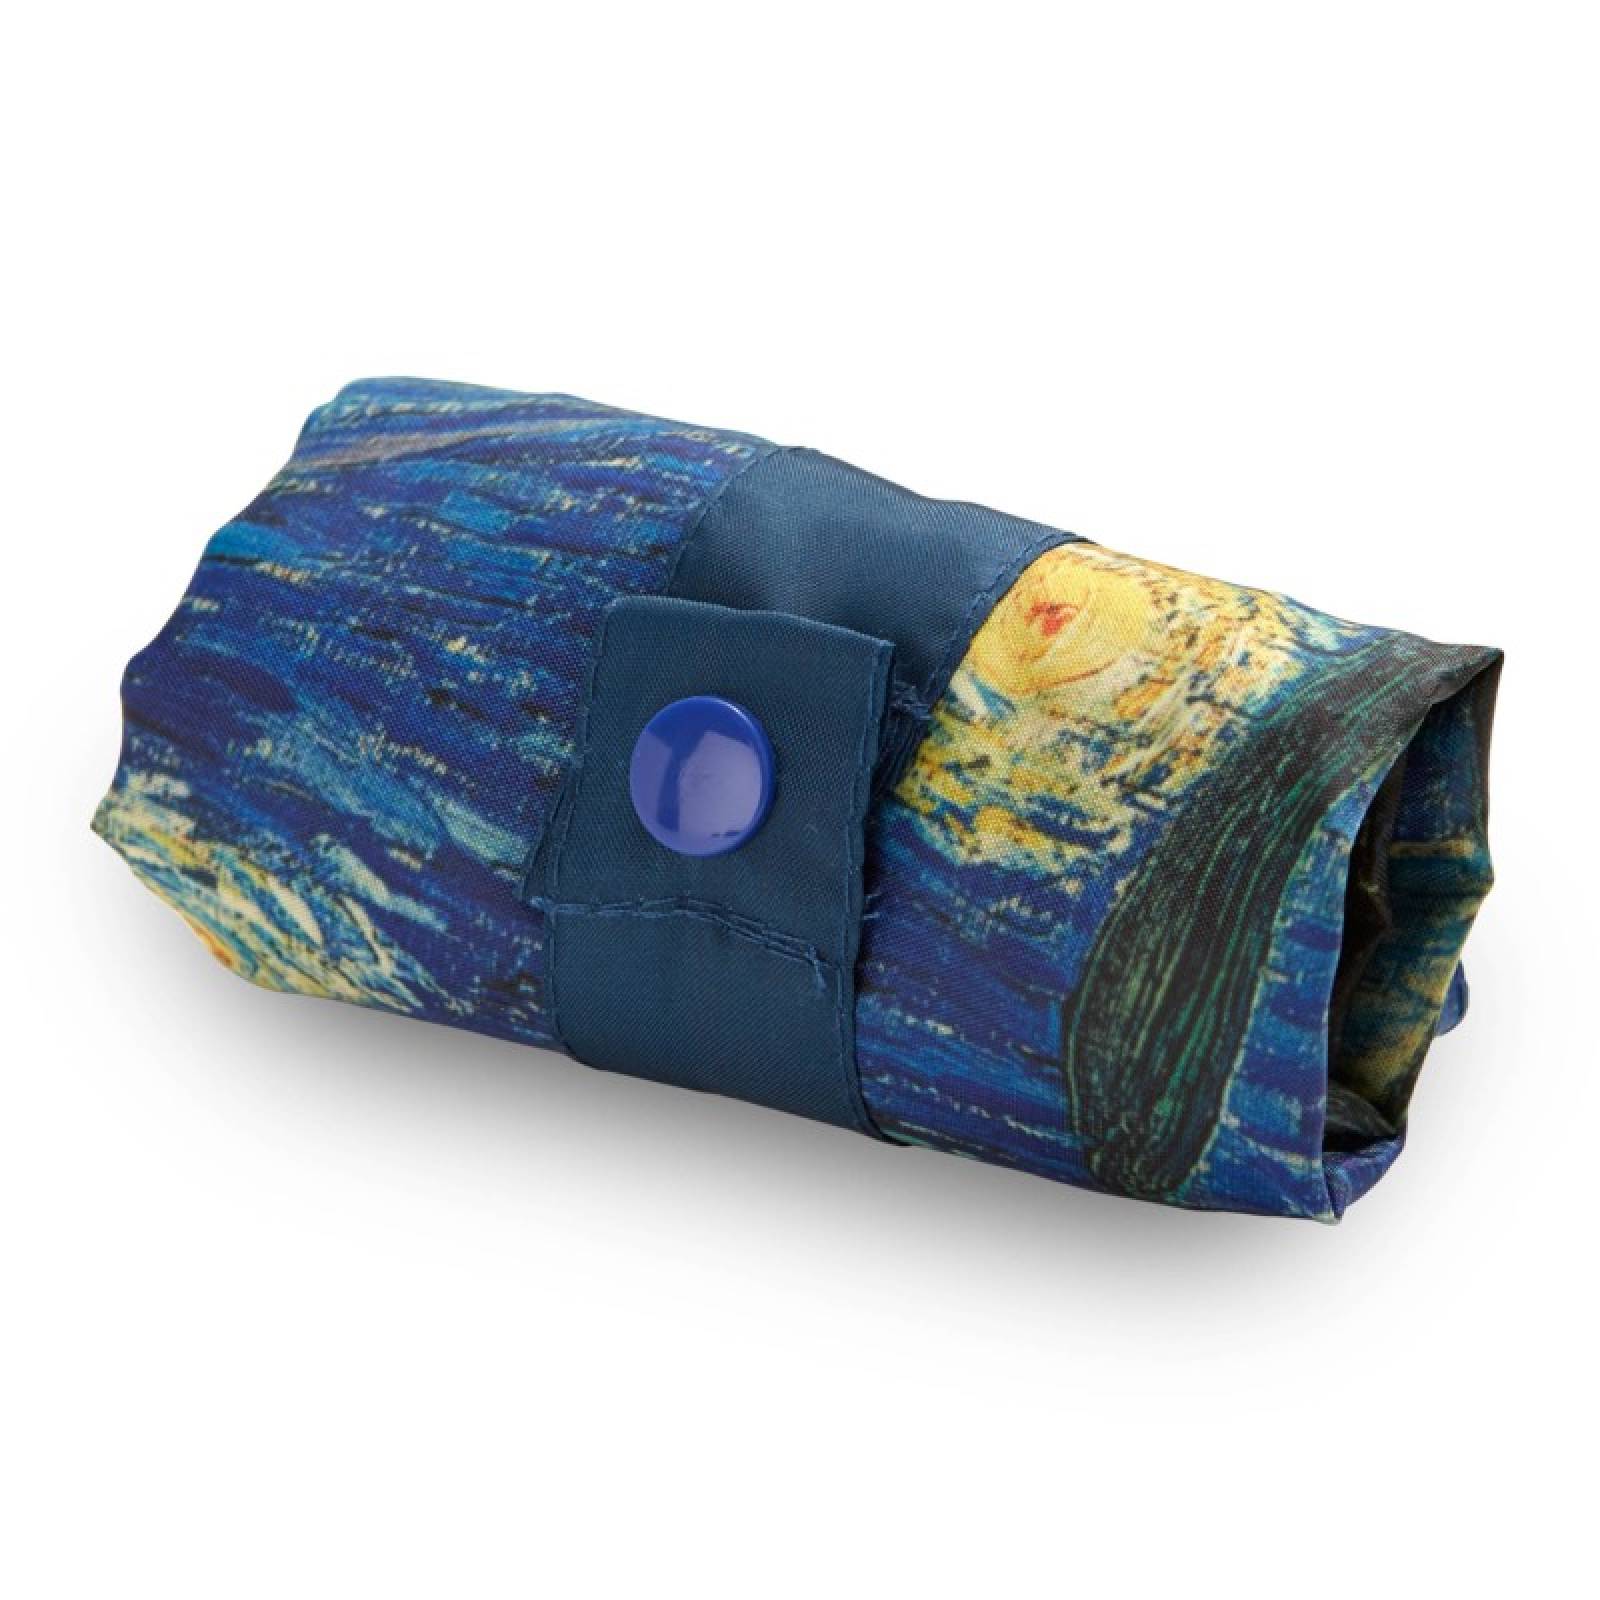 Van Gogh Starry Night - Eco Tote Bag With Pouch thumbnails